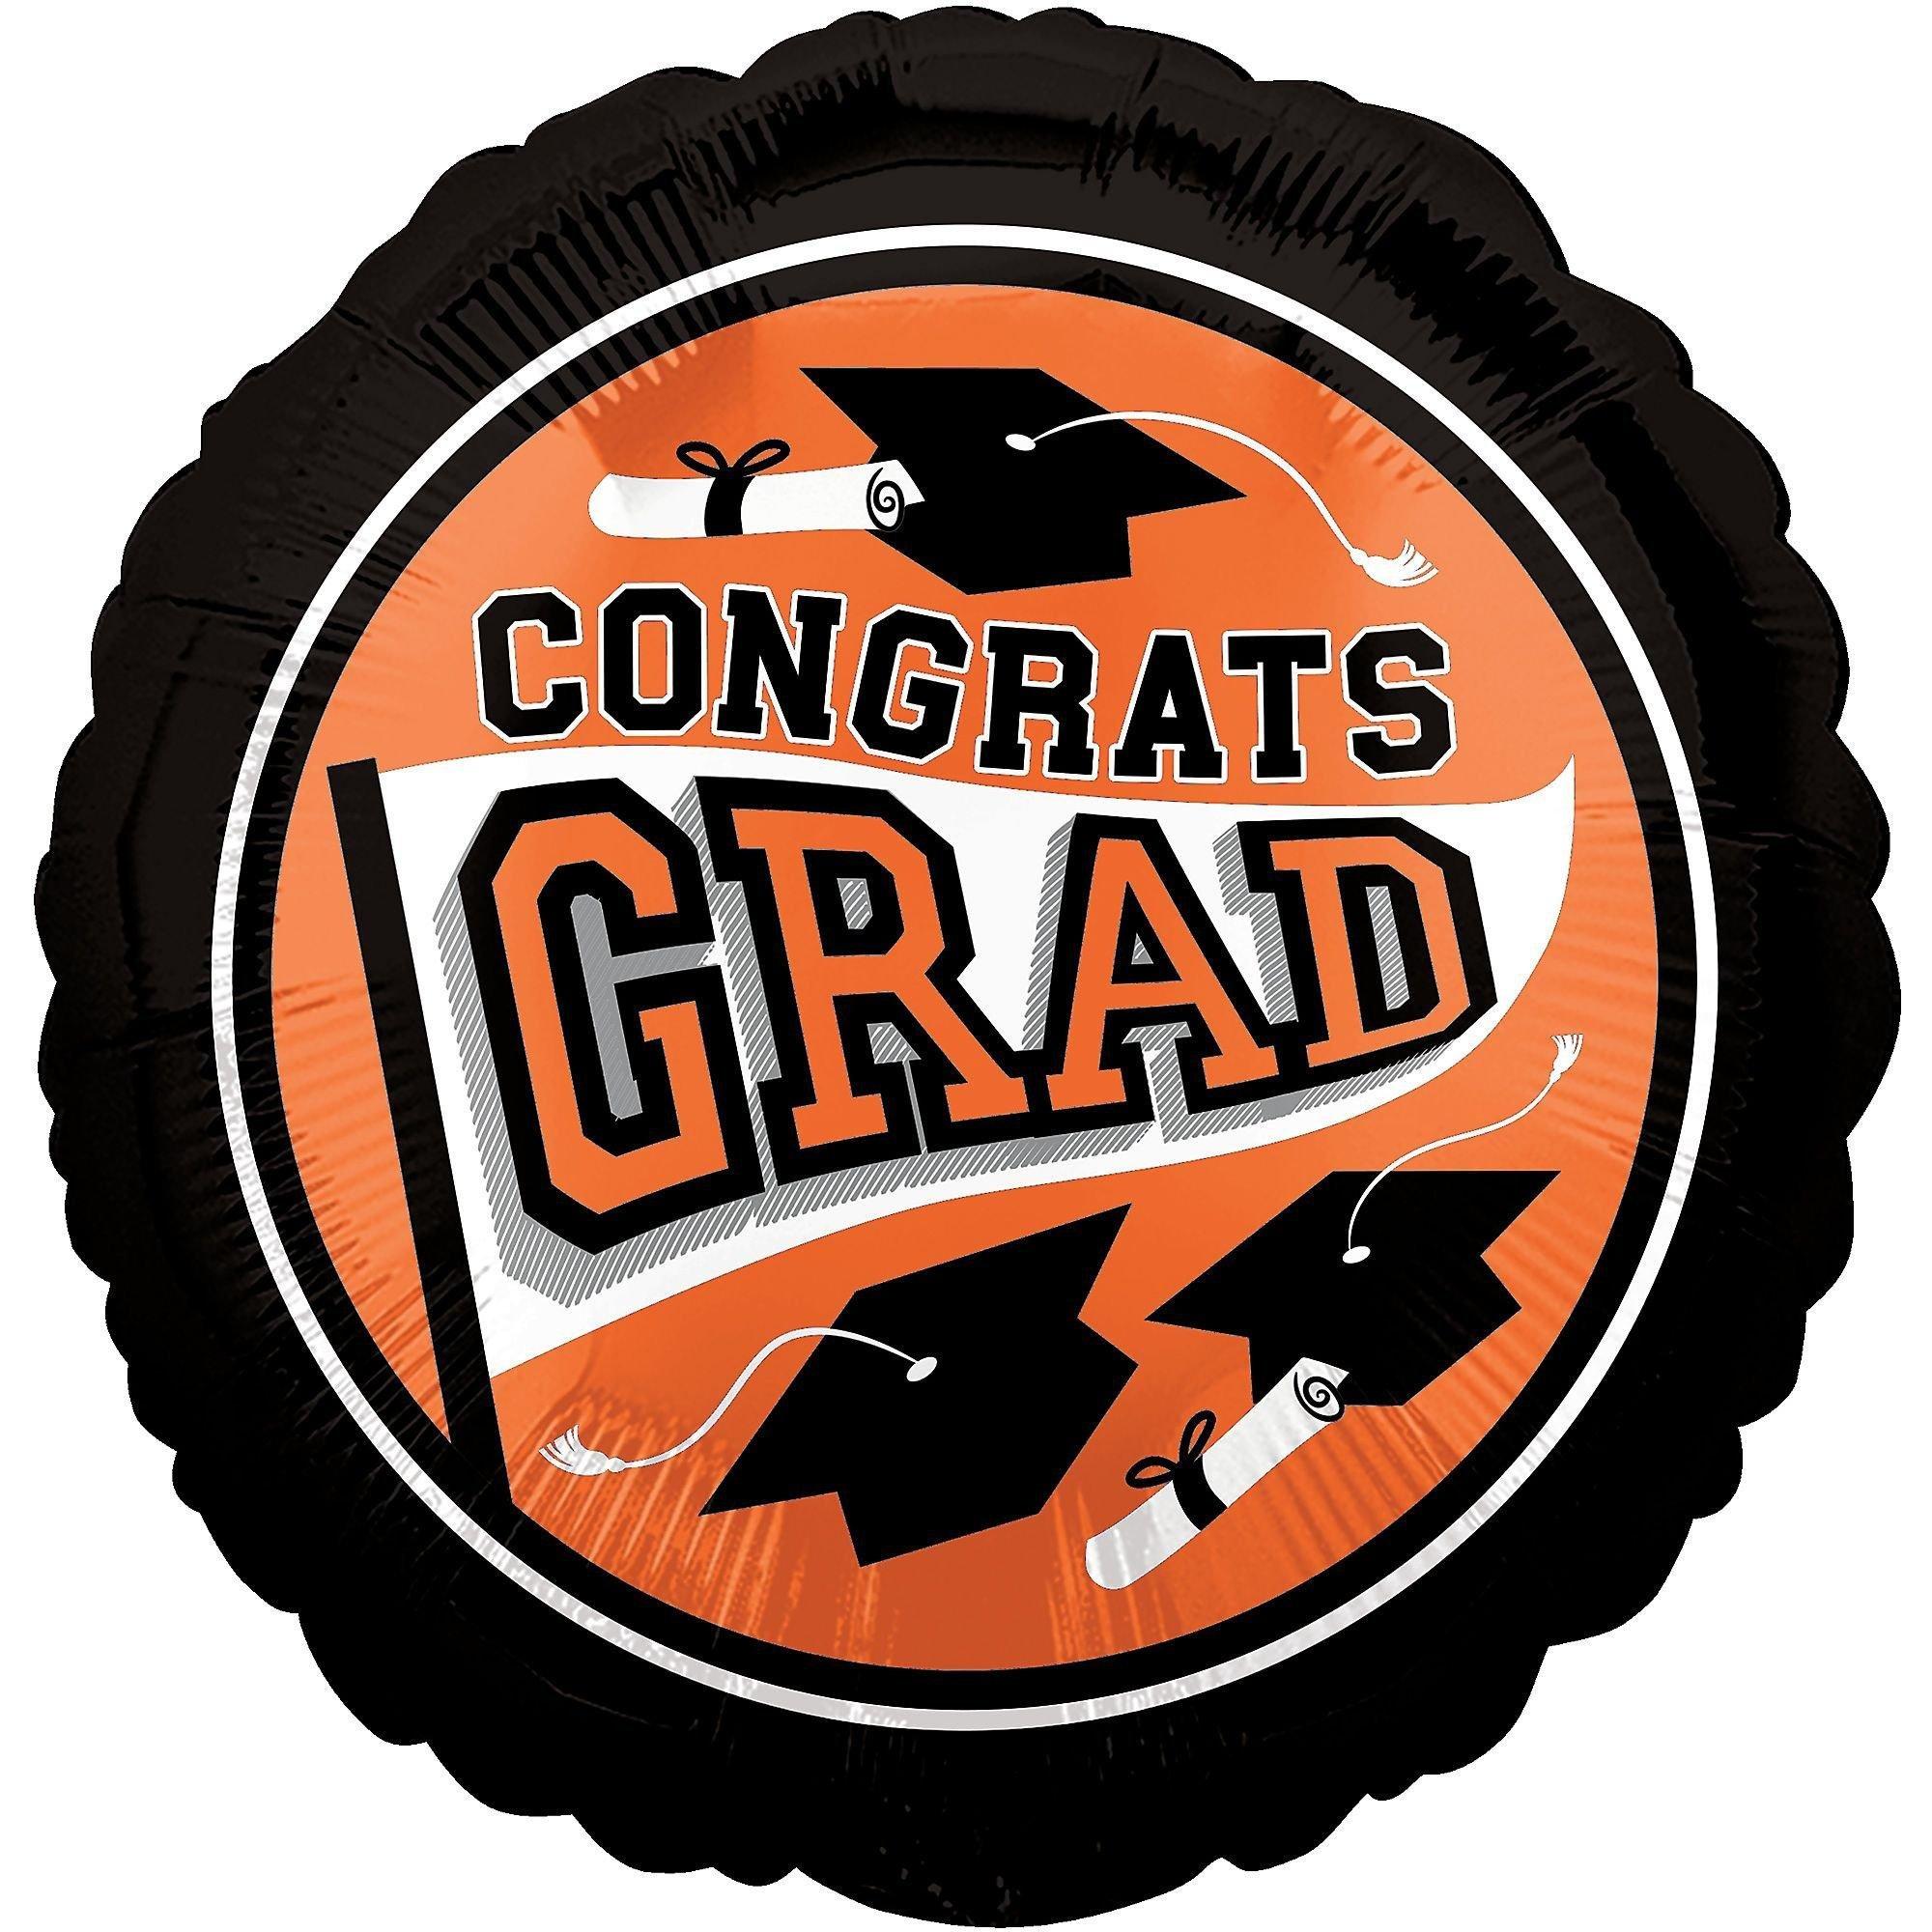 Graduation Party Decorations Kit with Banners, Balloons, Centerpiece, Streamers - Orange 2024 Congrats Grad